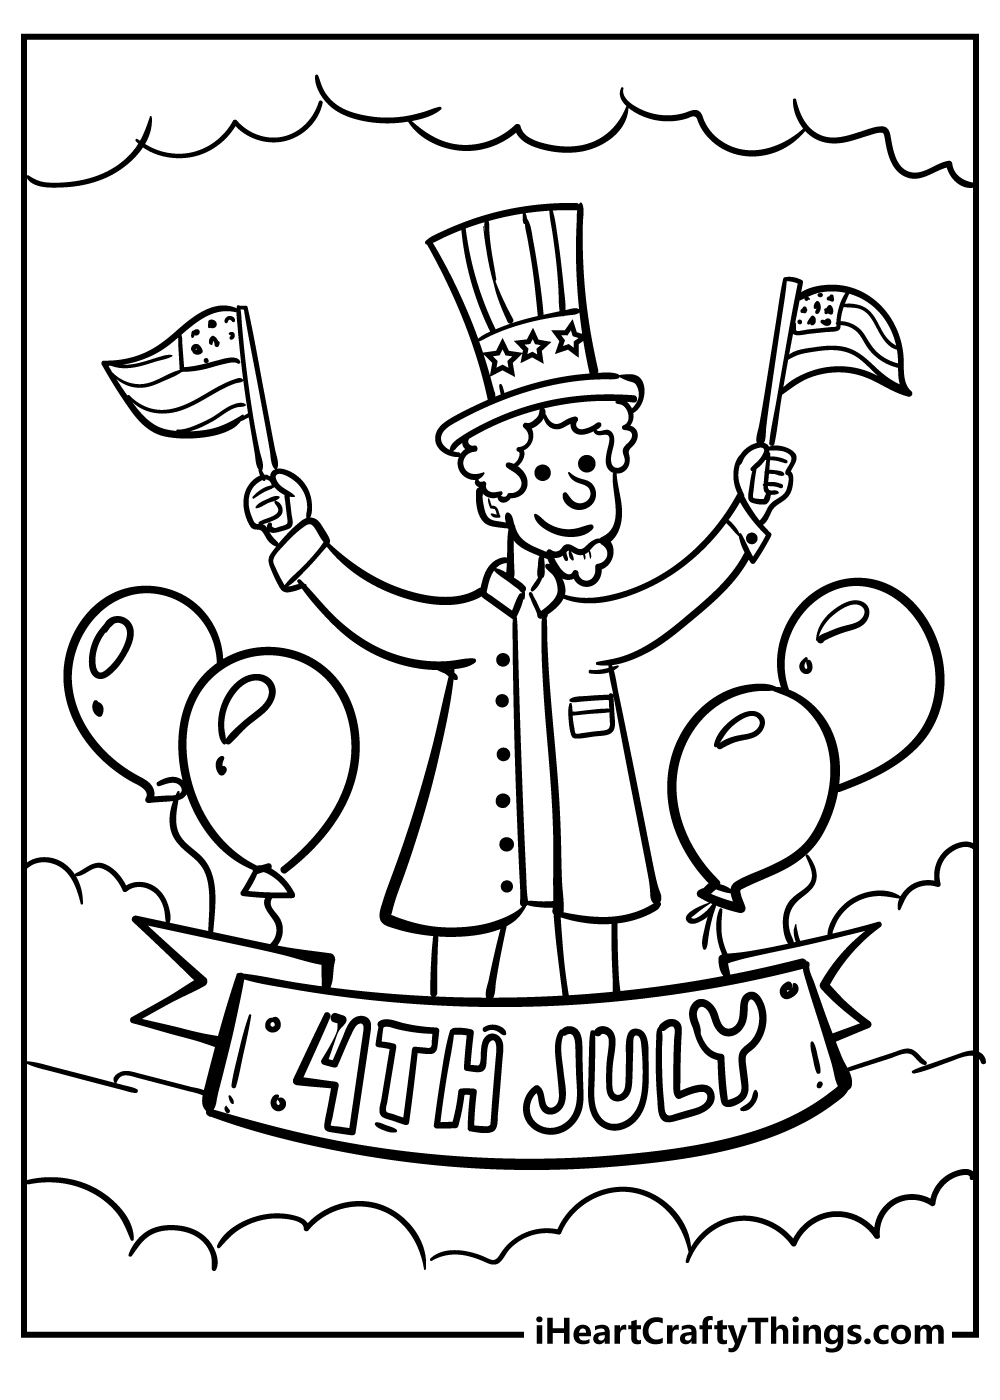 4th of July coloring pages free printable